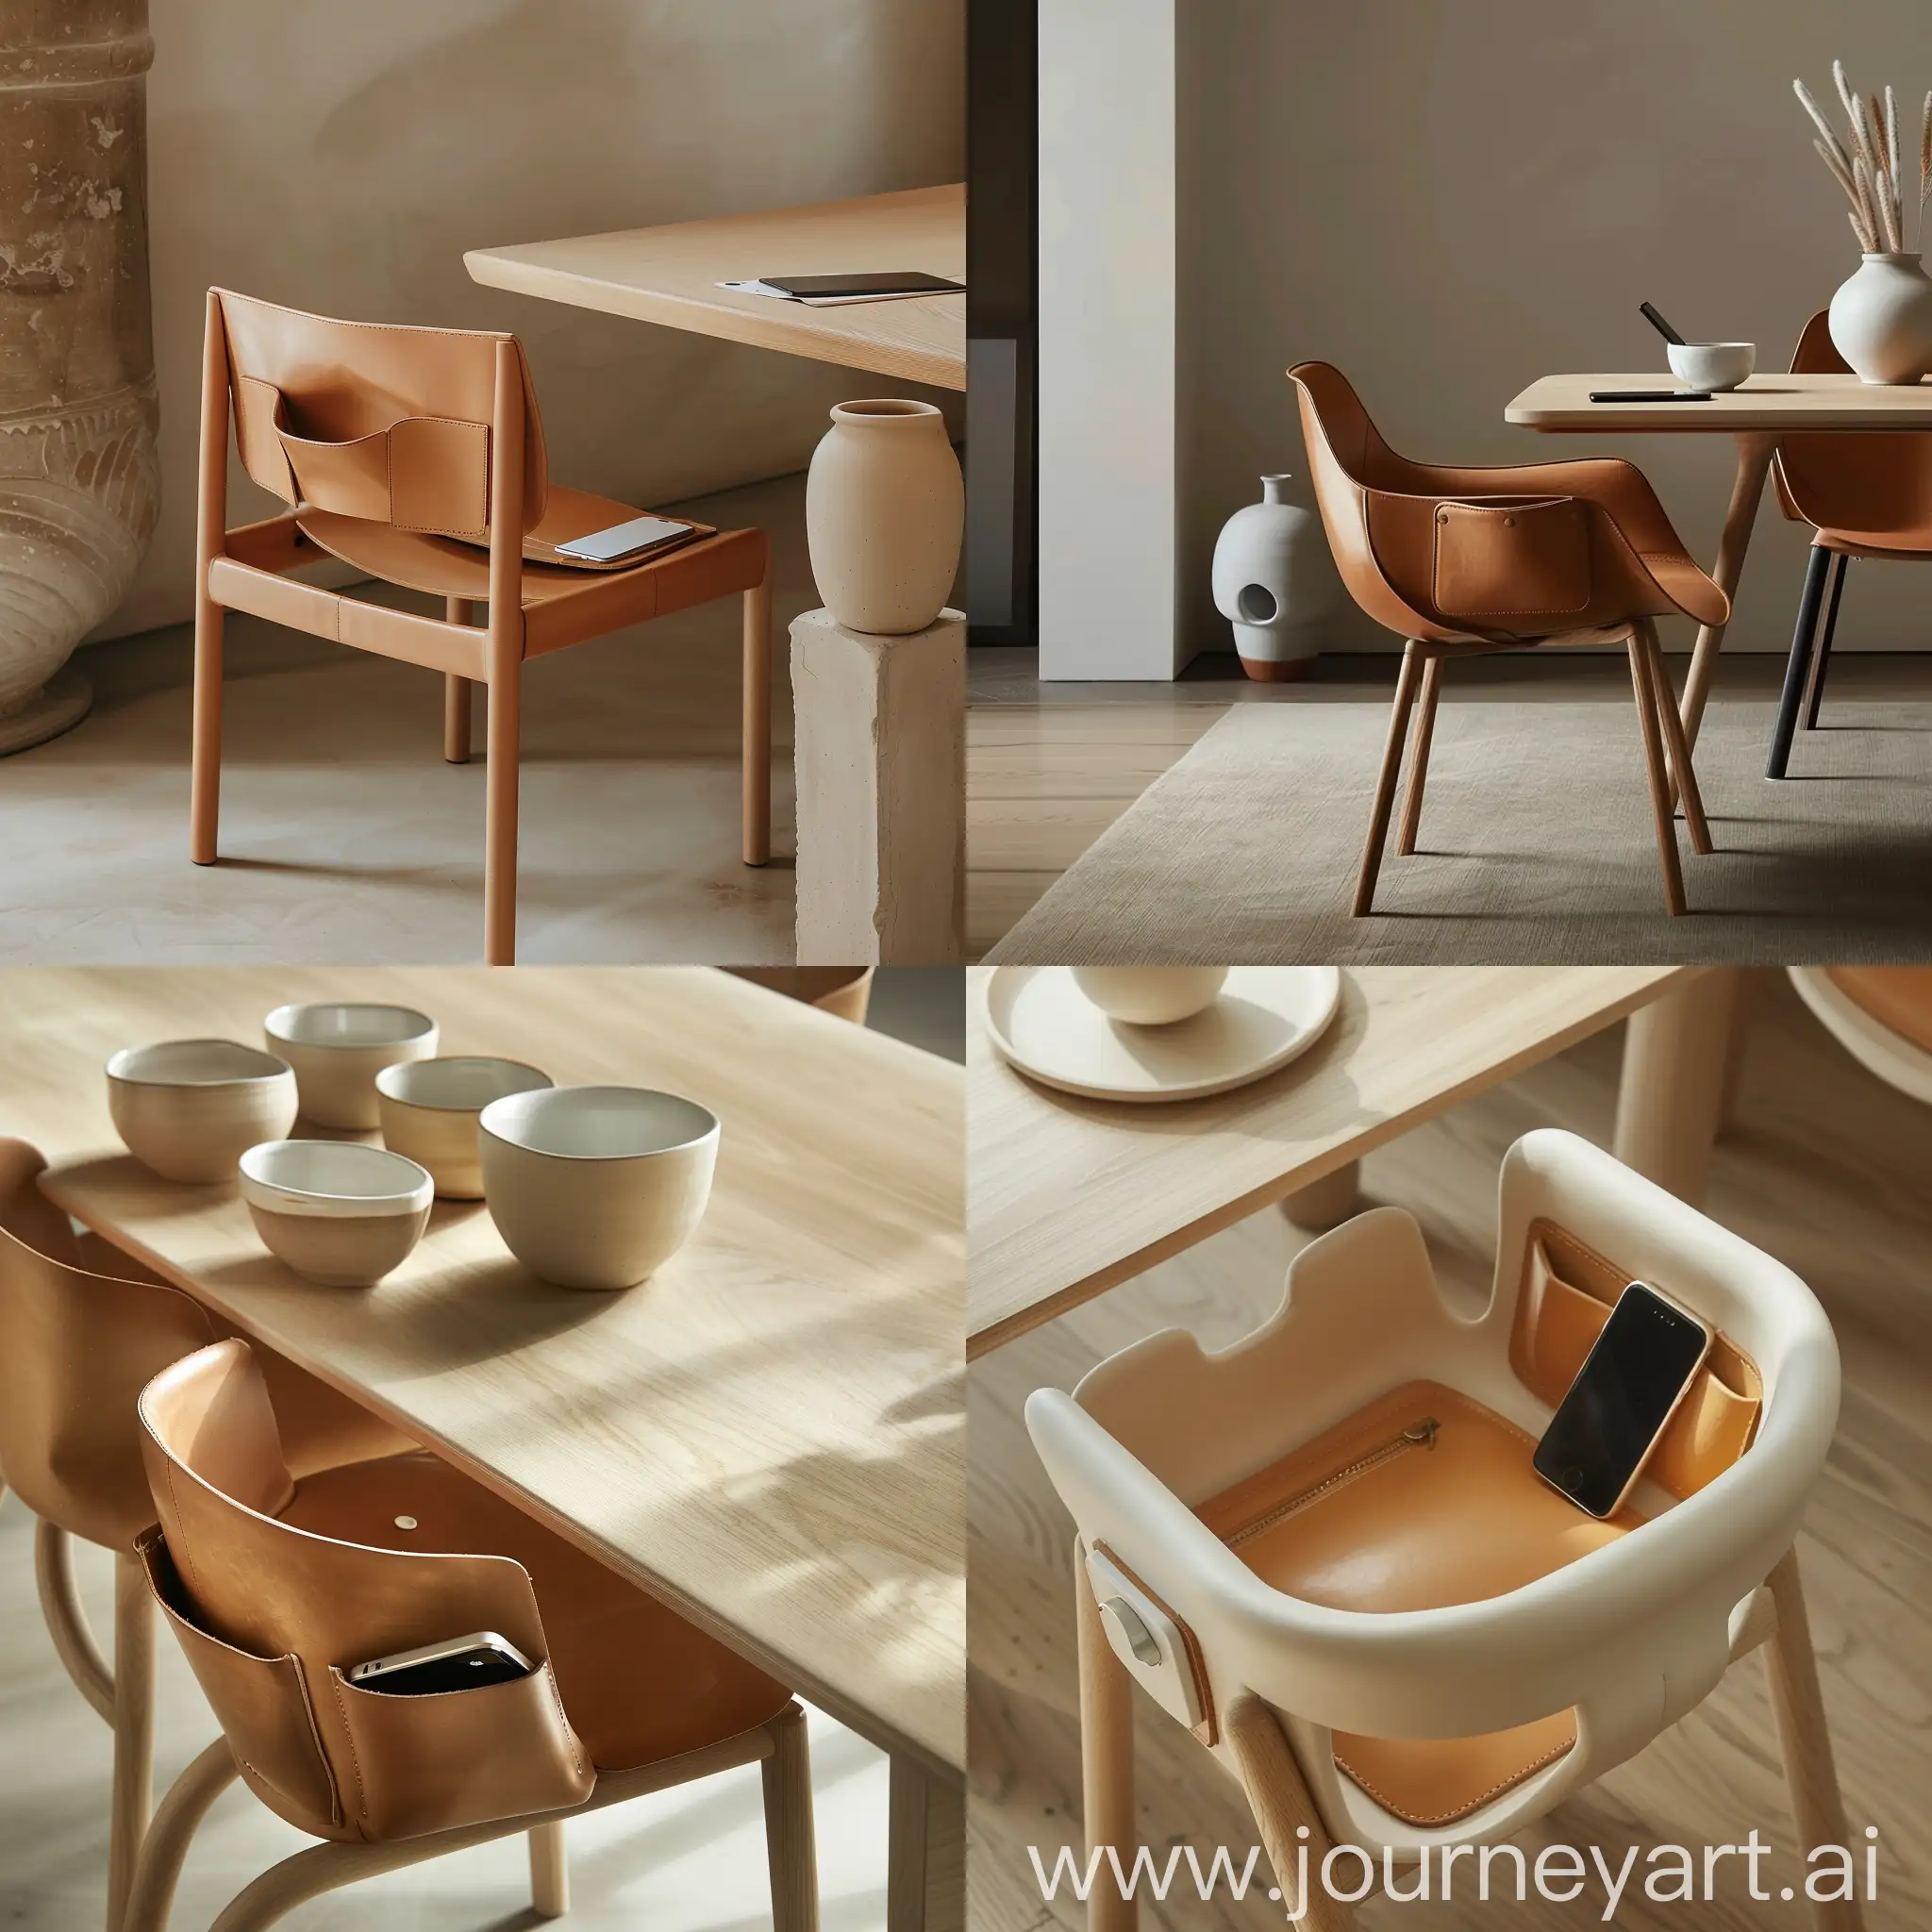 Japandi-Minimalist-Dining-Set-with-Leather-Chair-and-CeramicInspired-Design